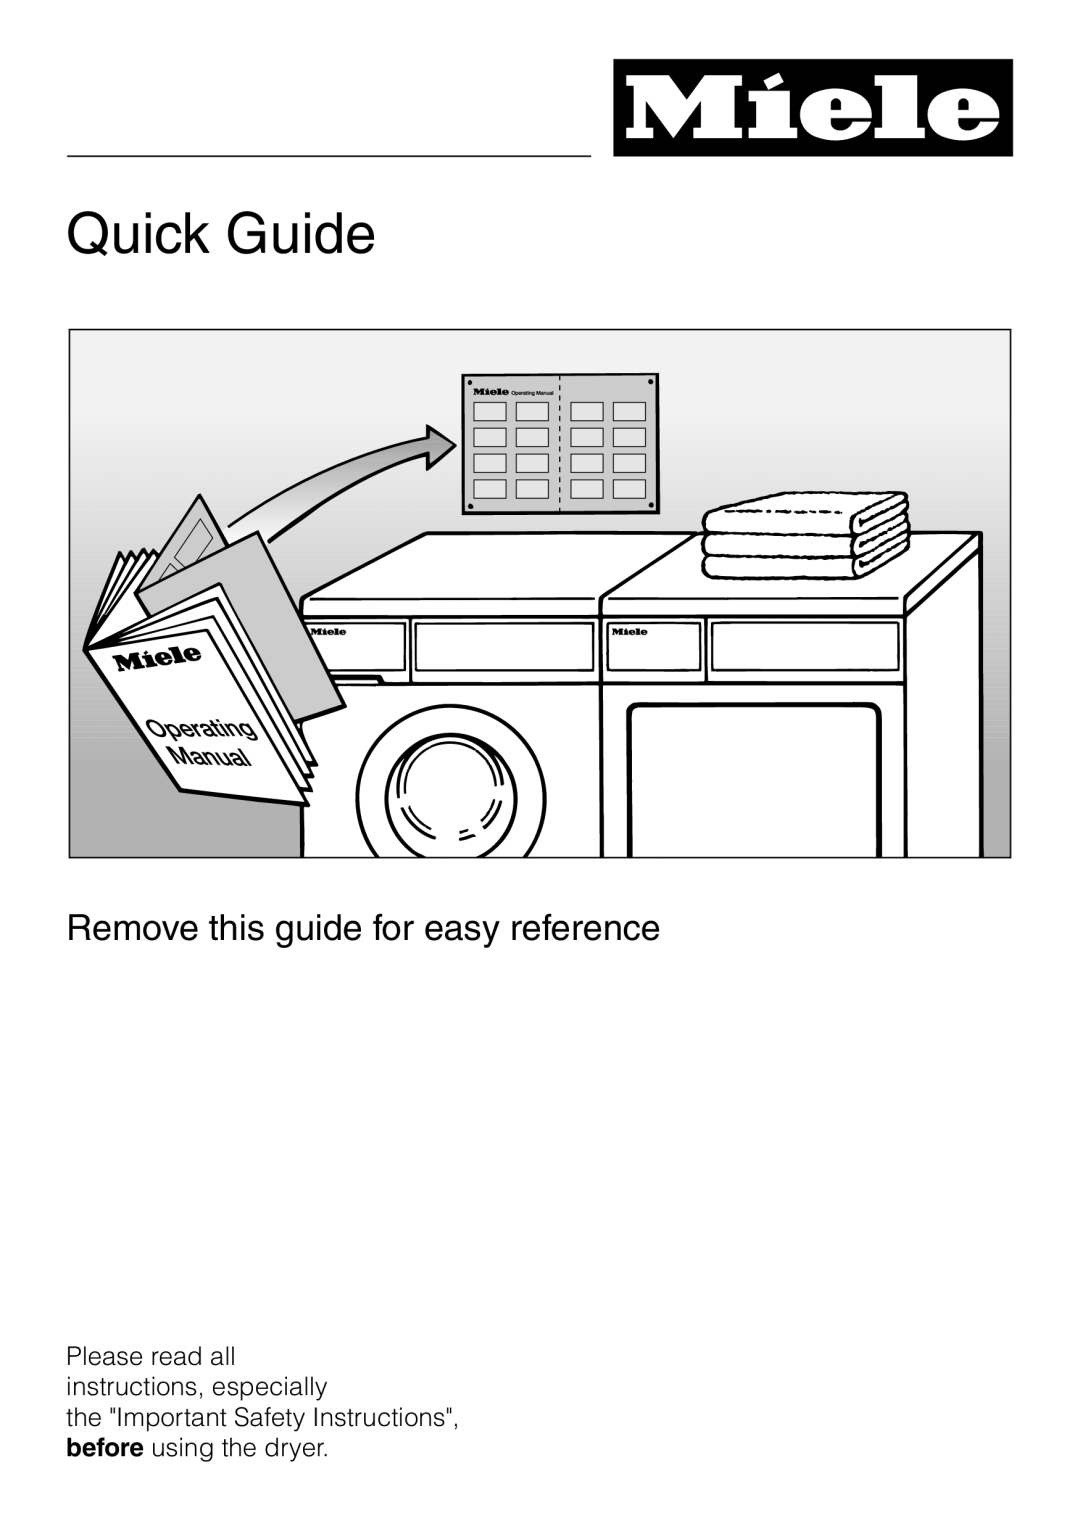 Miele T 1413 T 1415 operating instructions Quick Guide, Remove this guide for easy reference 